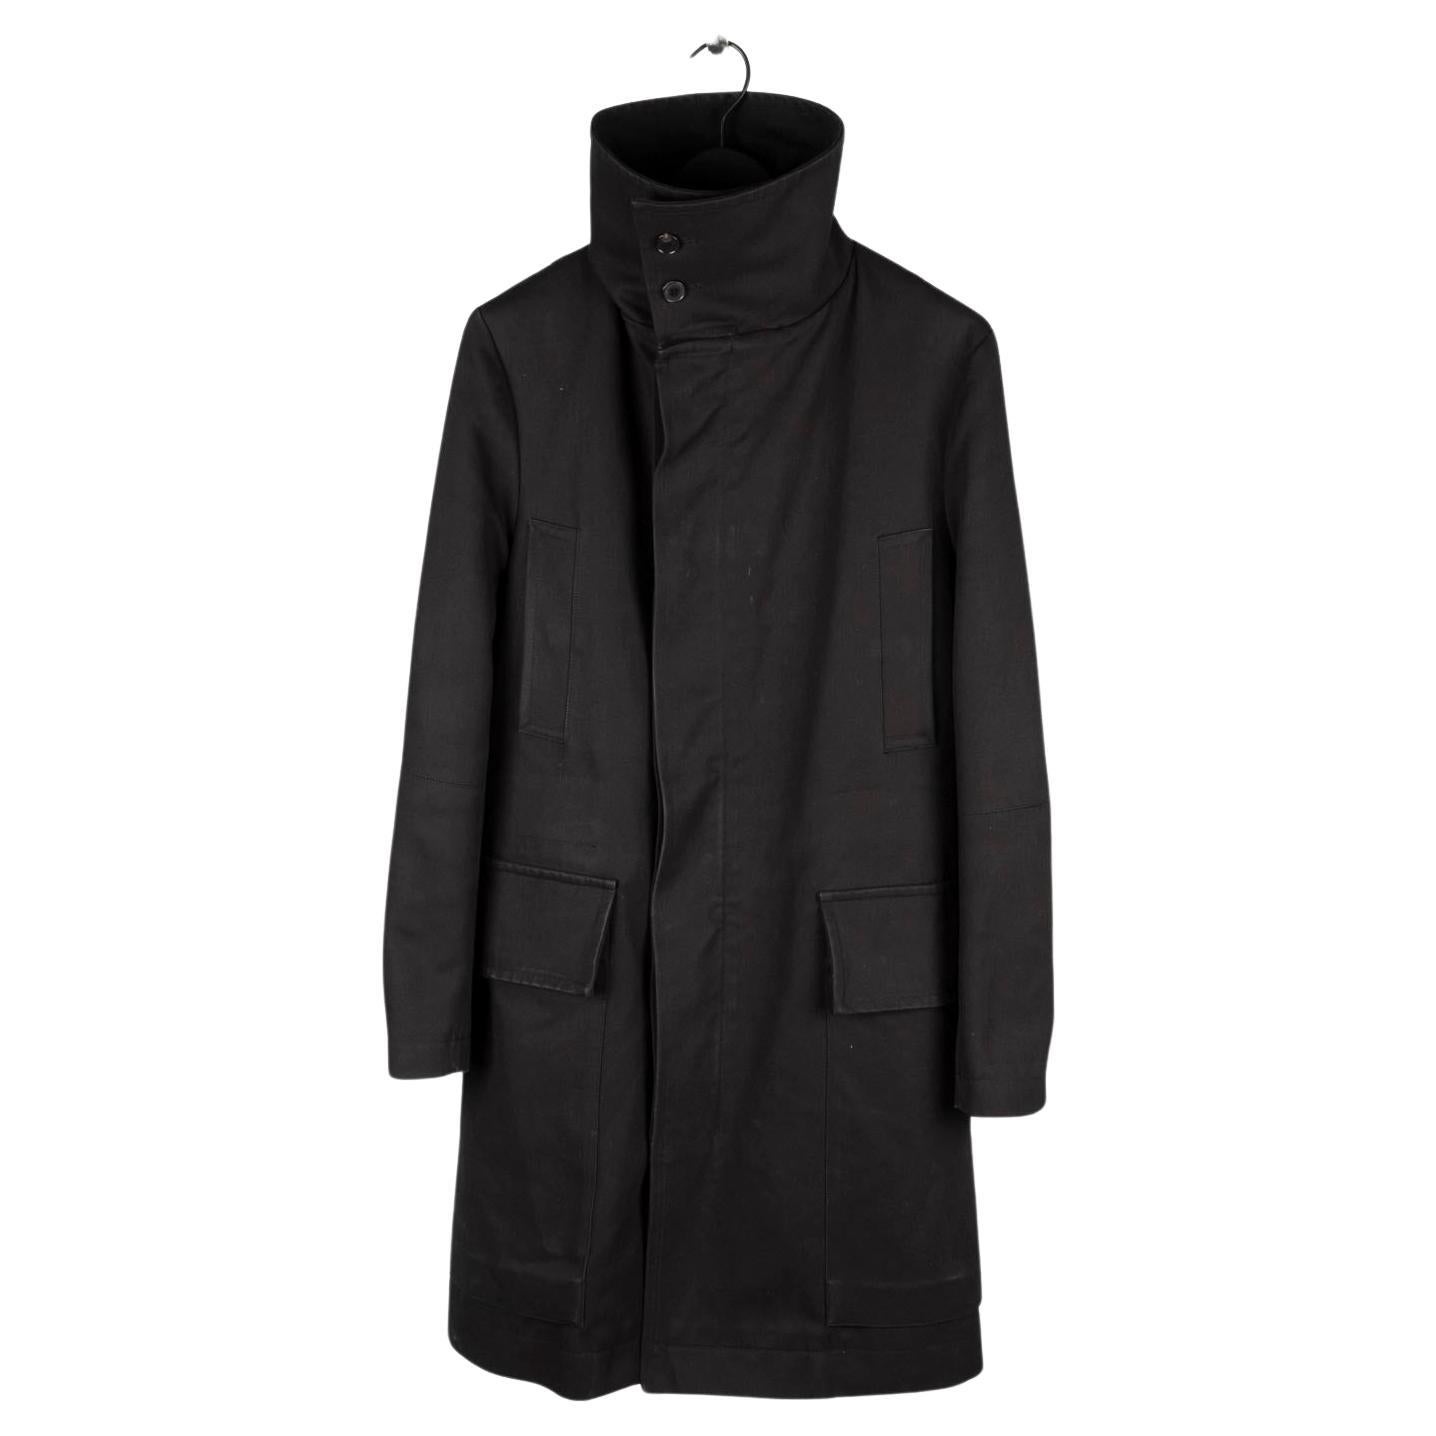 Yves Saint Laurent Men Coat by Tom Ford Rive Gauche Size 50 (Large), S550 For Sale